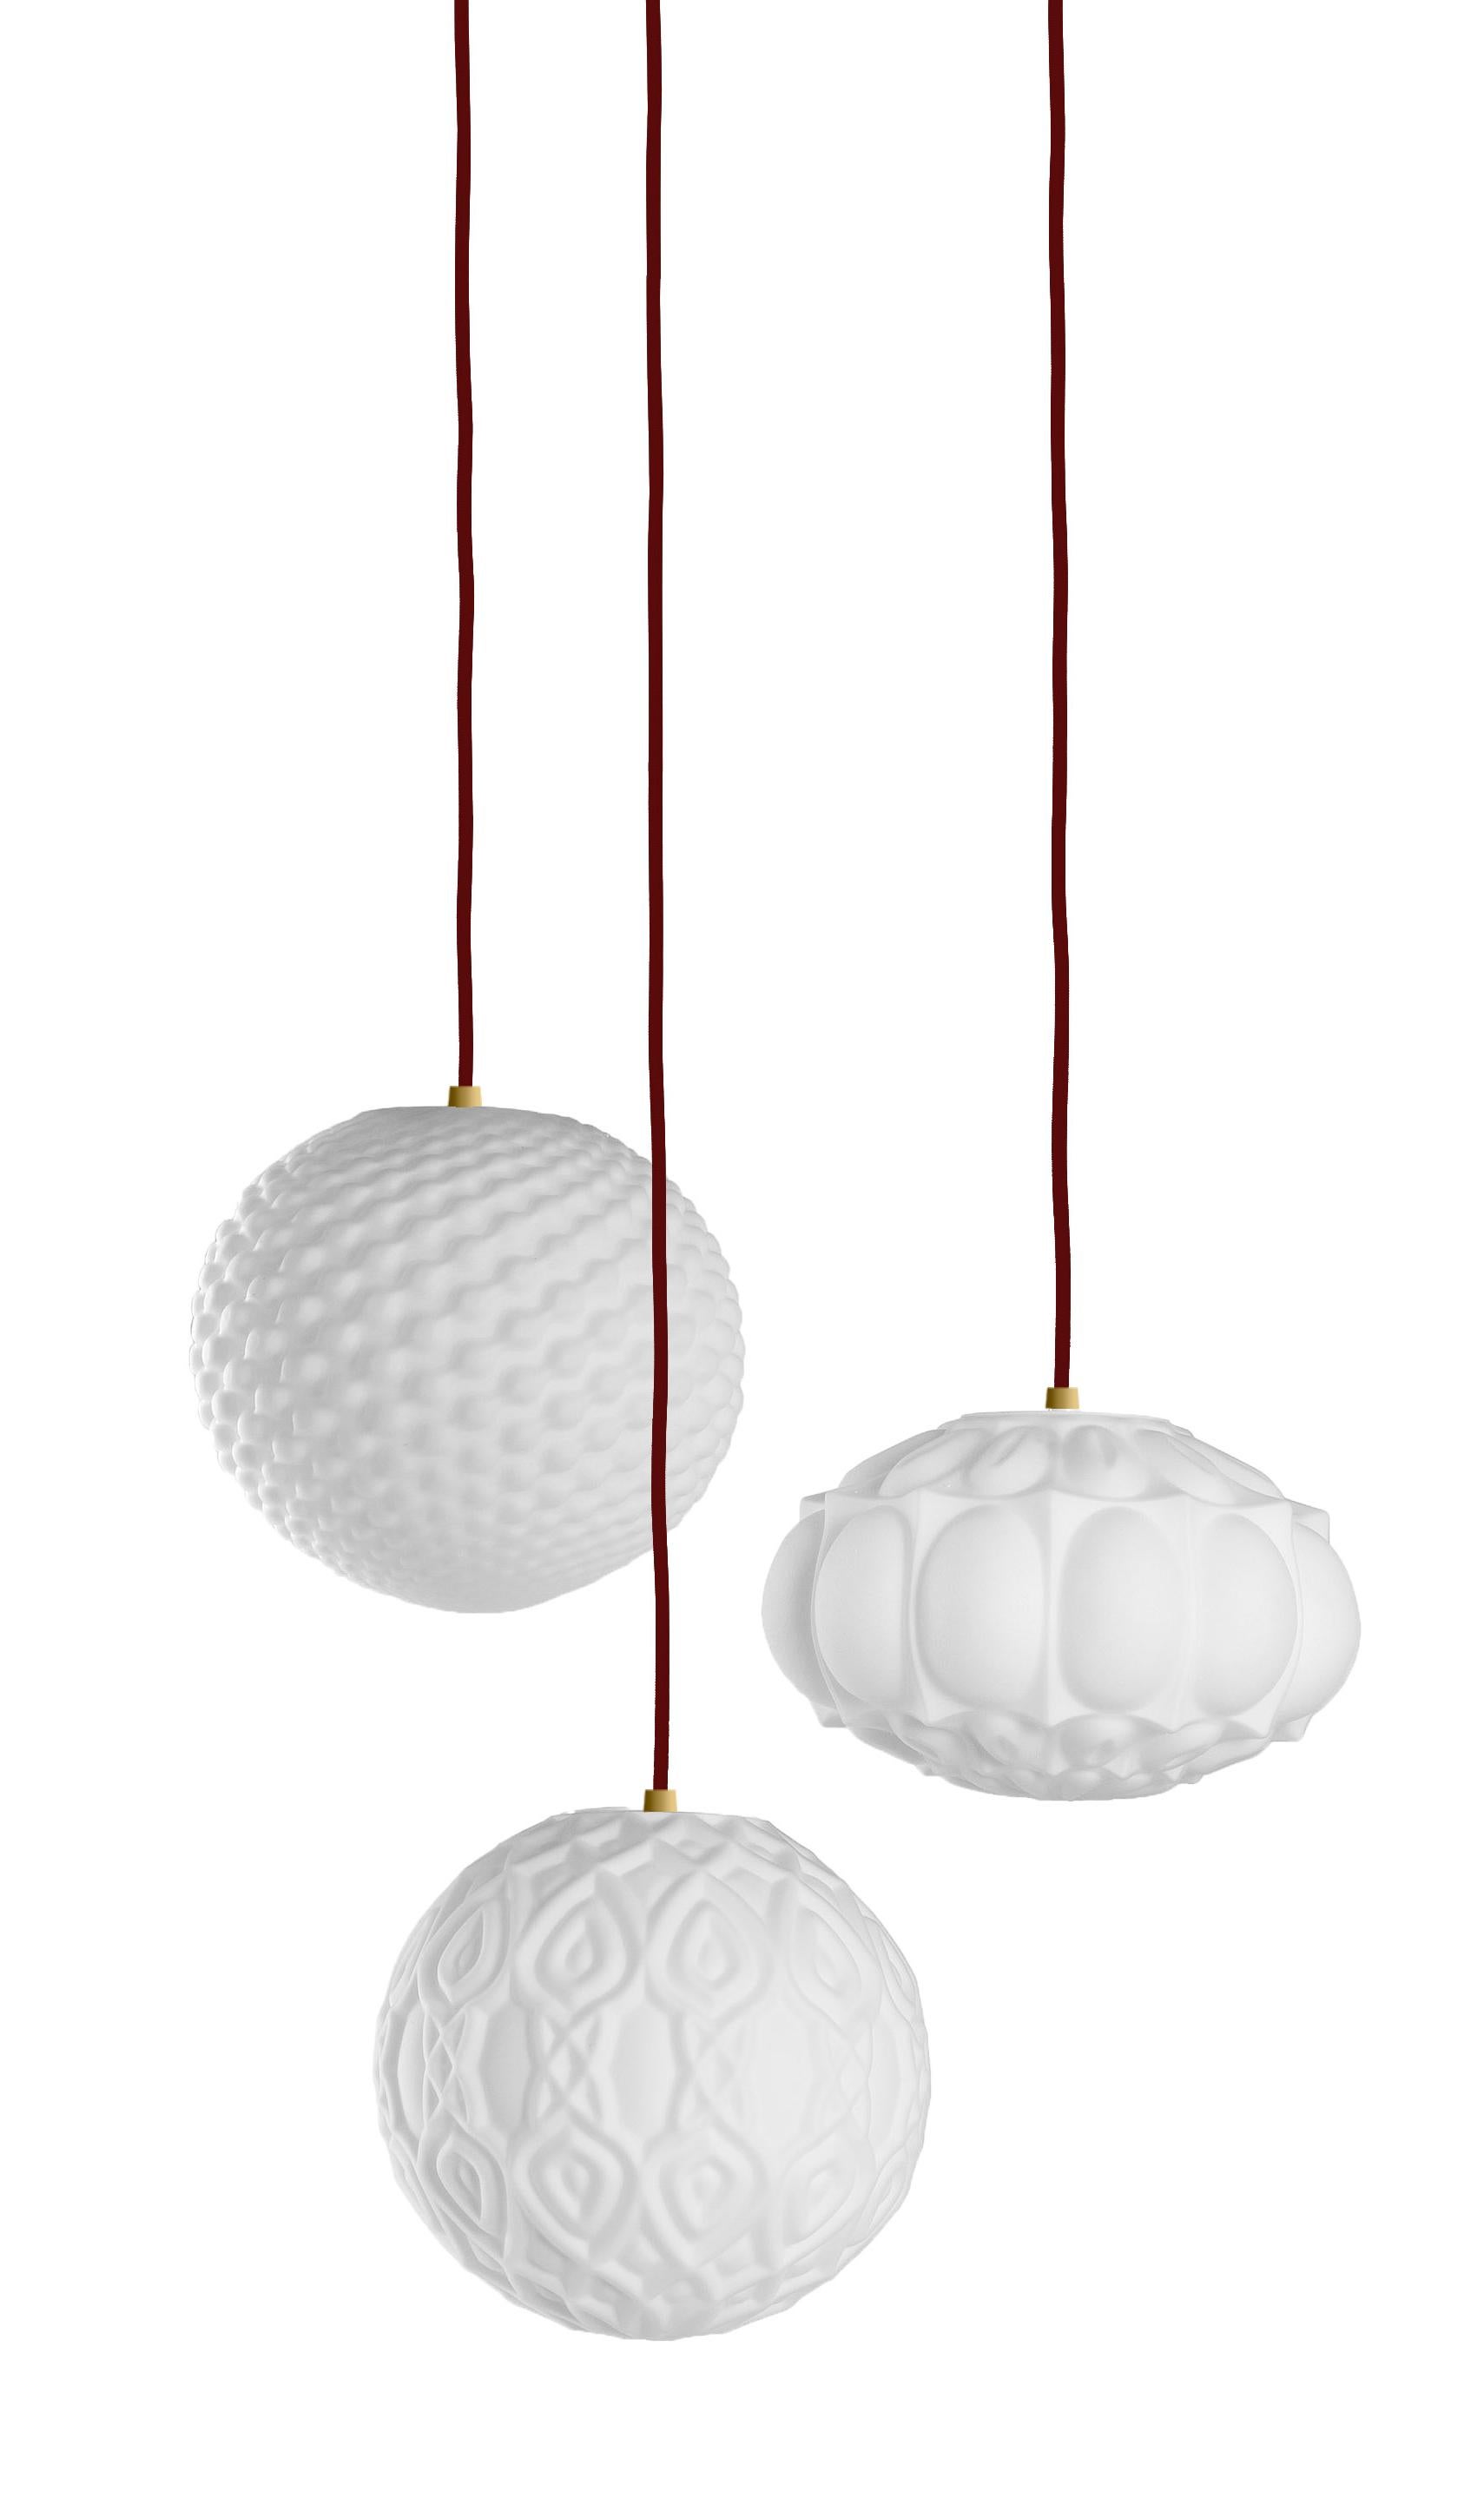 CHAGALL 3-light chandelier with Shades in white frost blown glass. Metal ceiling rose and details in gold finishing. Cable in bordeaux fabric.